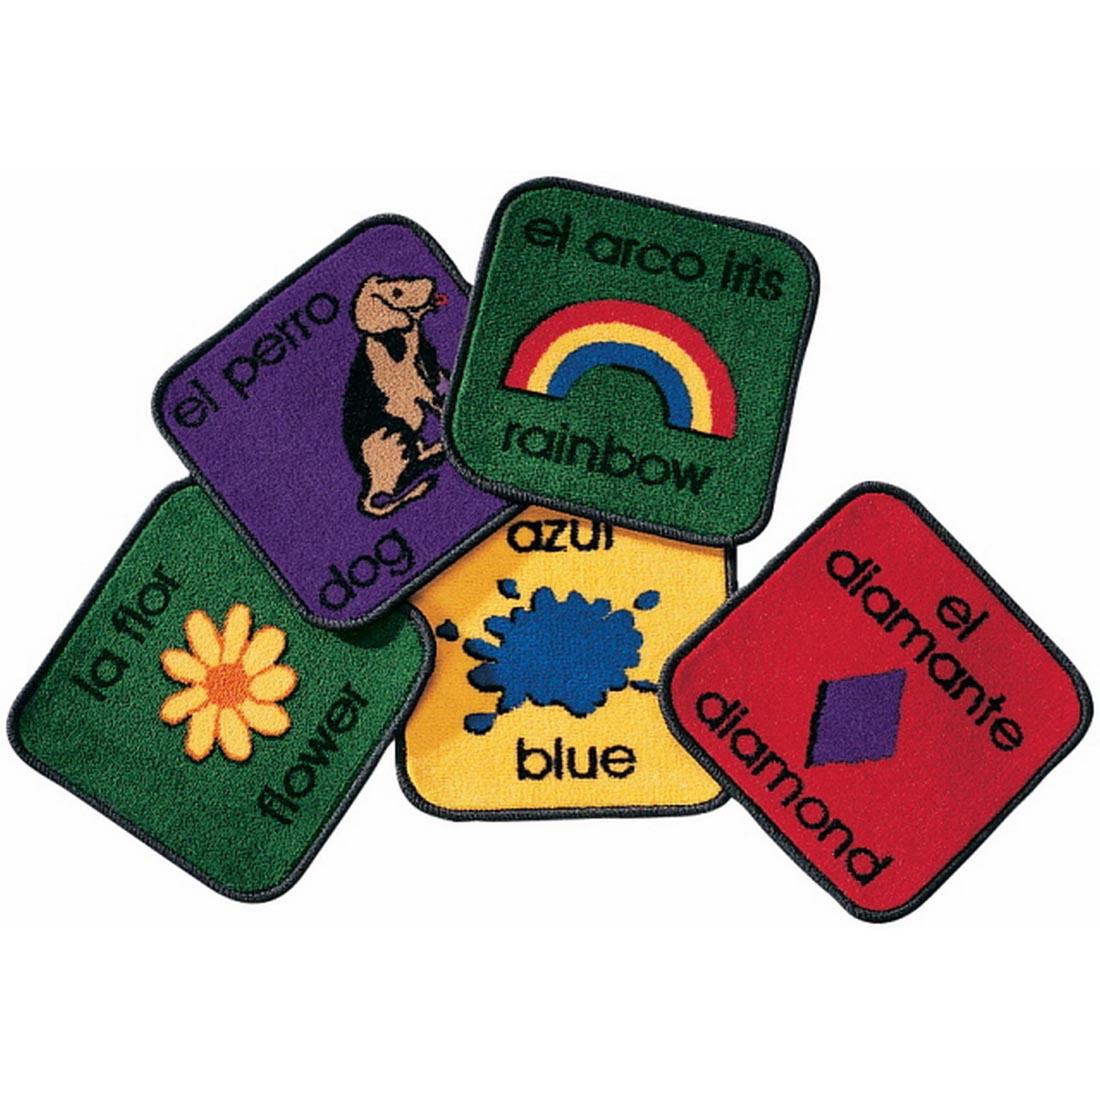 Bilingual Word Carpet Squares by Carpets For Kids